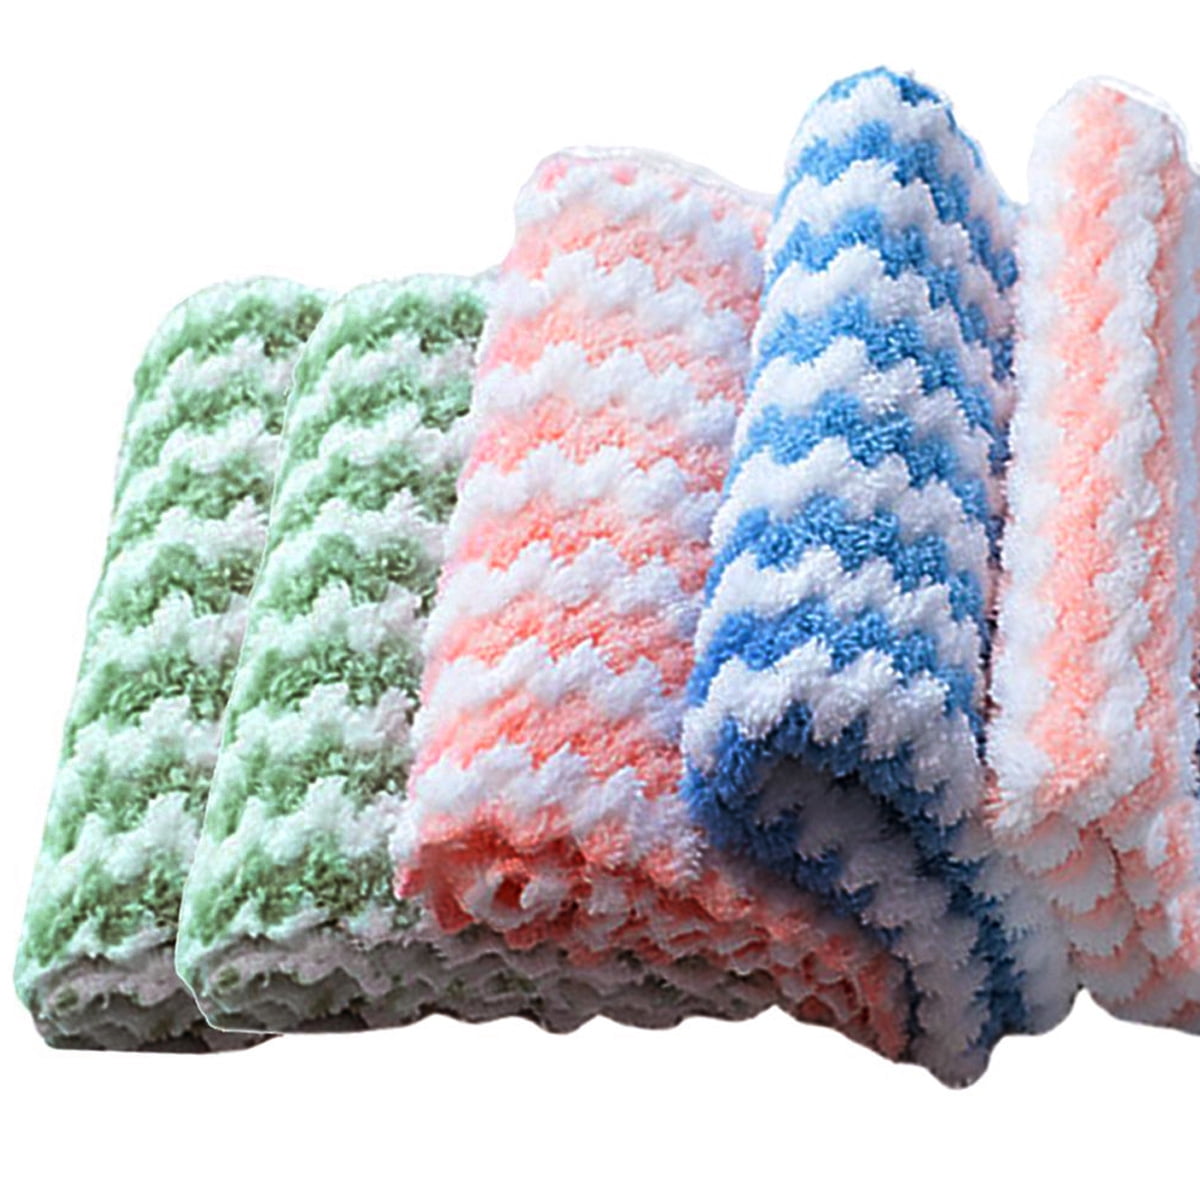 Anti-Grease Kitchen Cleaning Towels - Set of 5 Absorbable Rags for